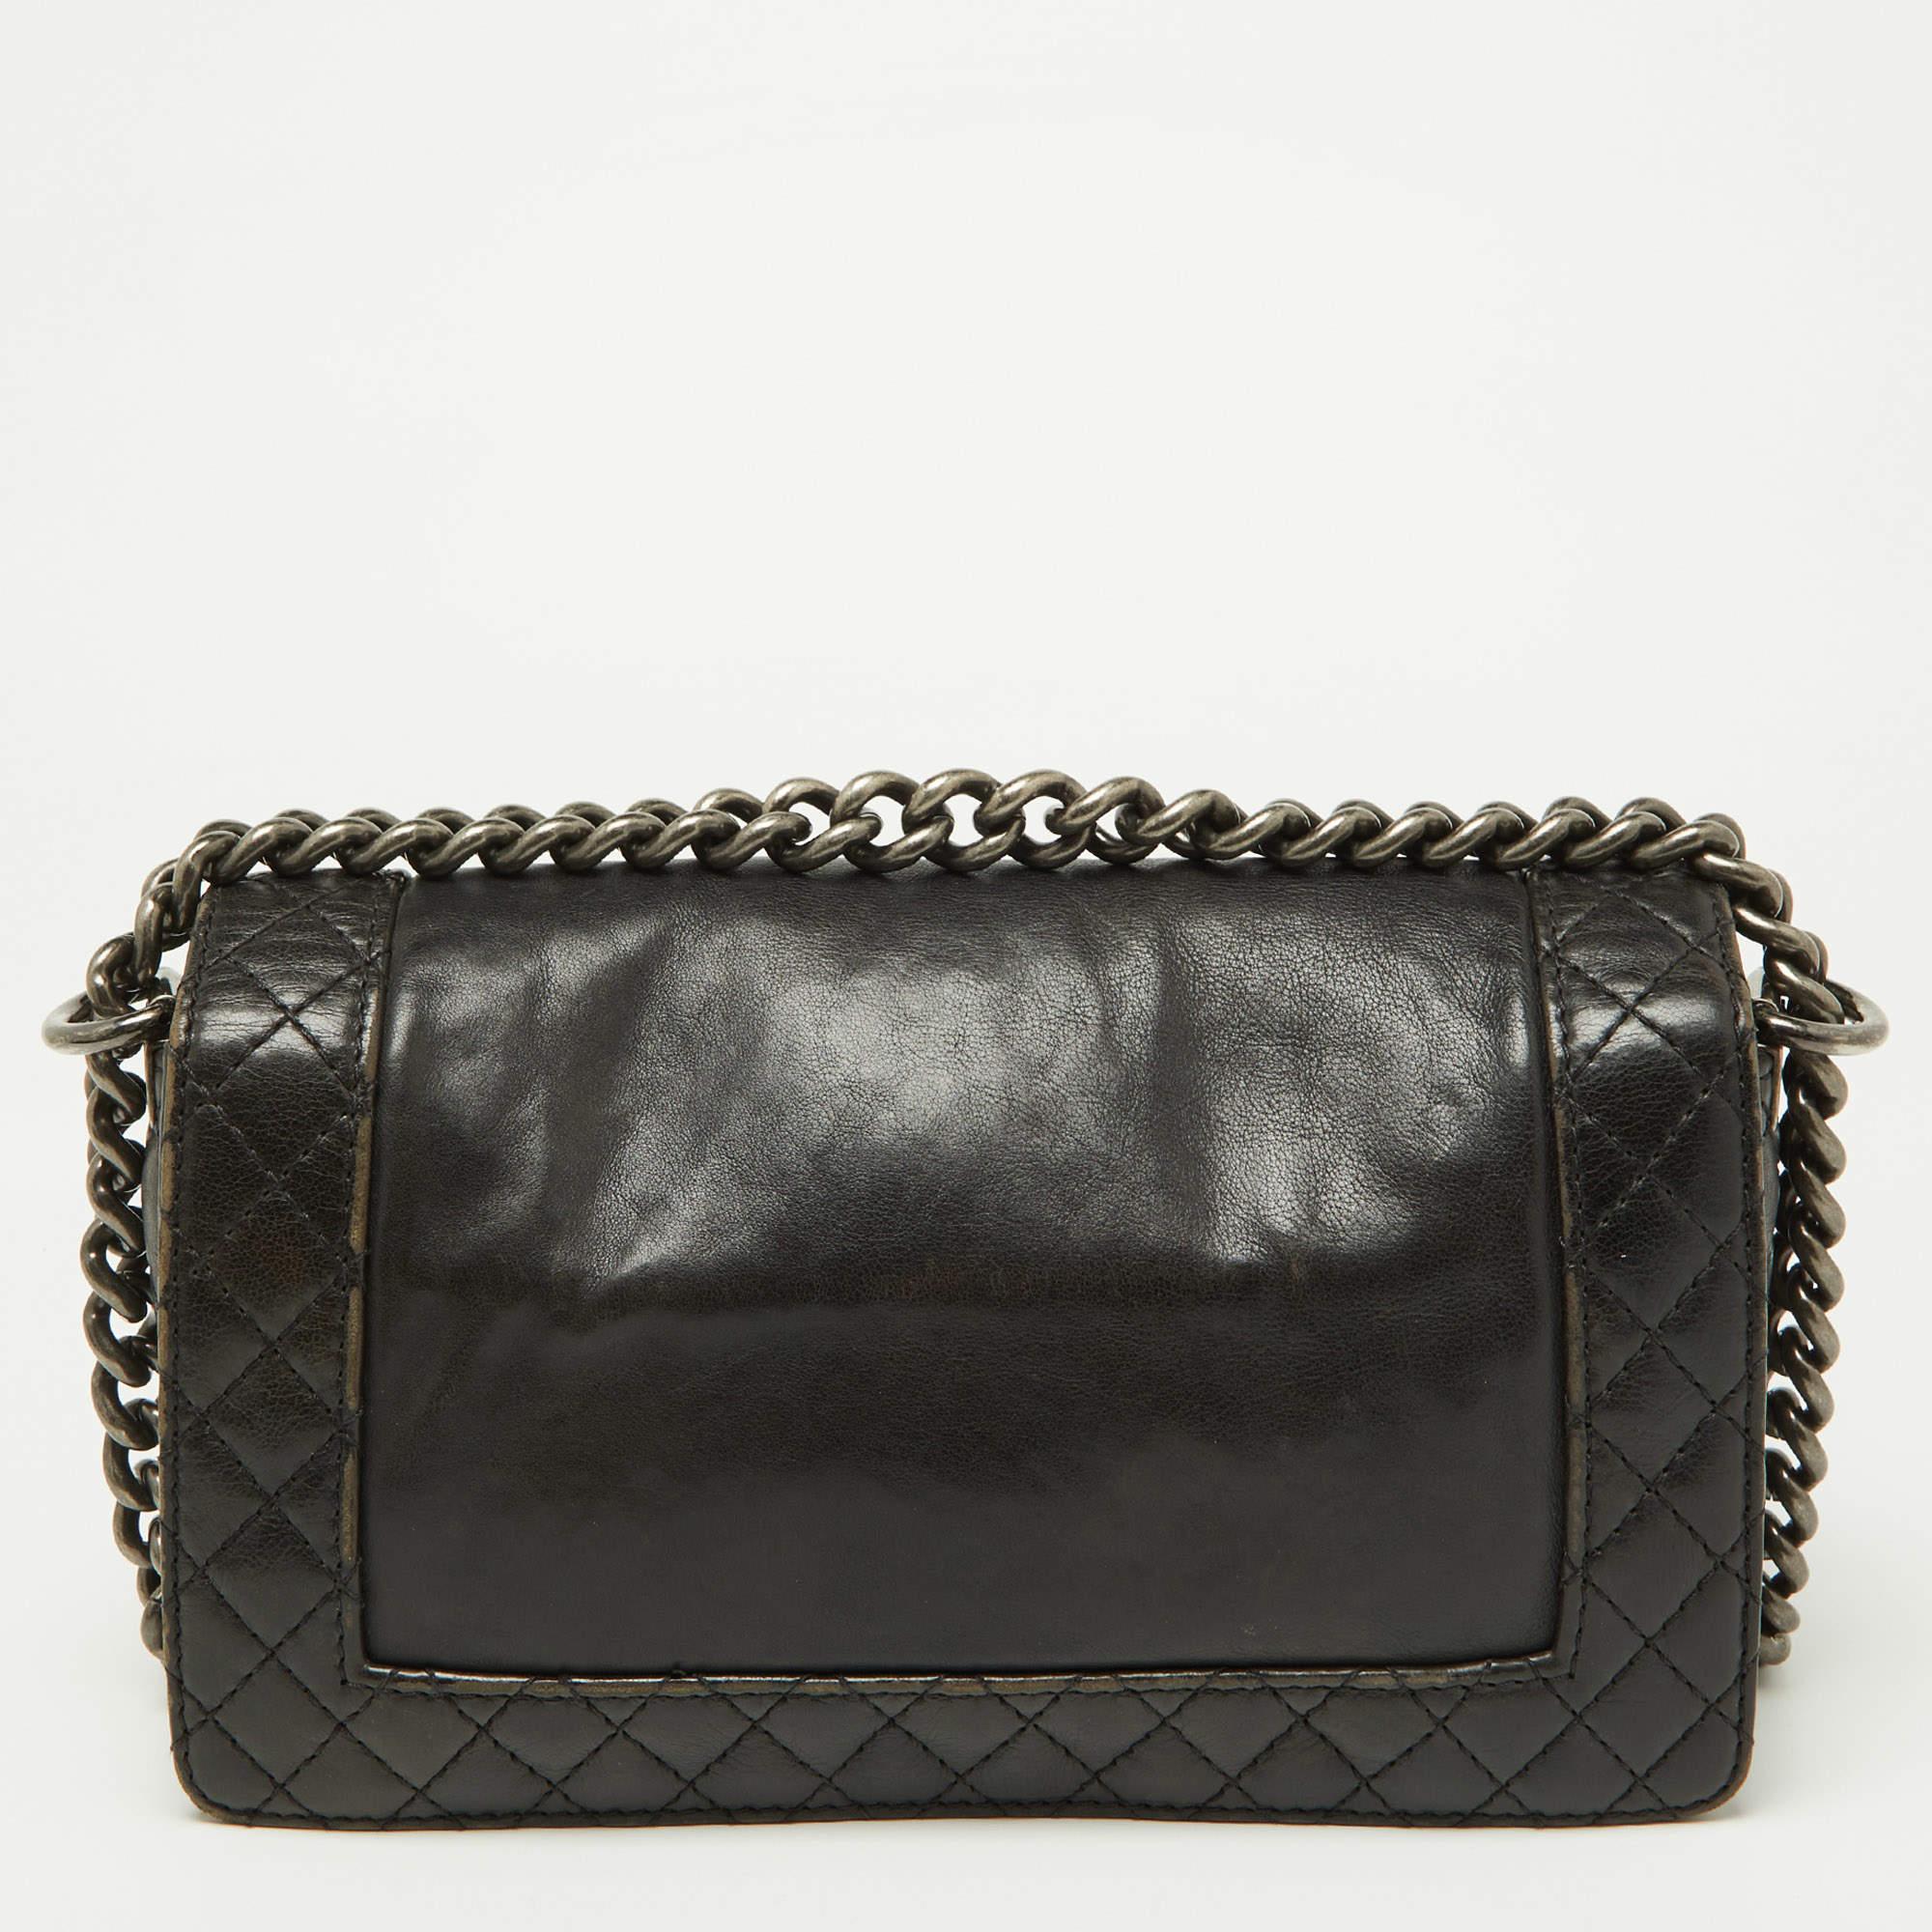 Chanel Black Quilted Leather Medium Boy Bag 7